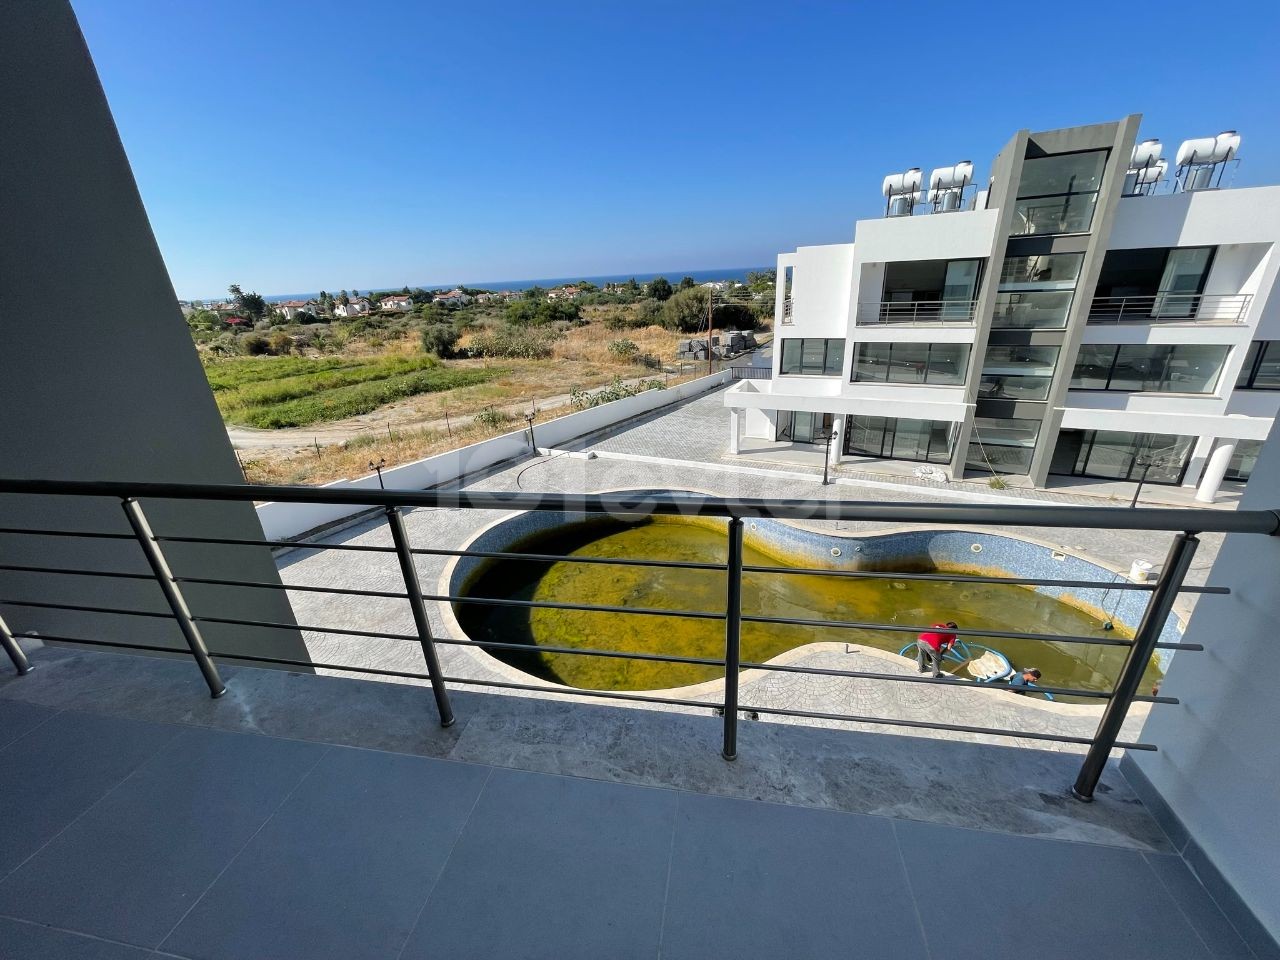 KYRENIA EDREMITTE MERIT PARK AND KAYA PALAZZO ARE WITHIN WALKING DISTANCE OF THE HOTEL 2+1 ** 